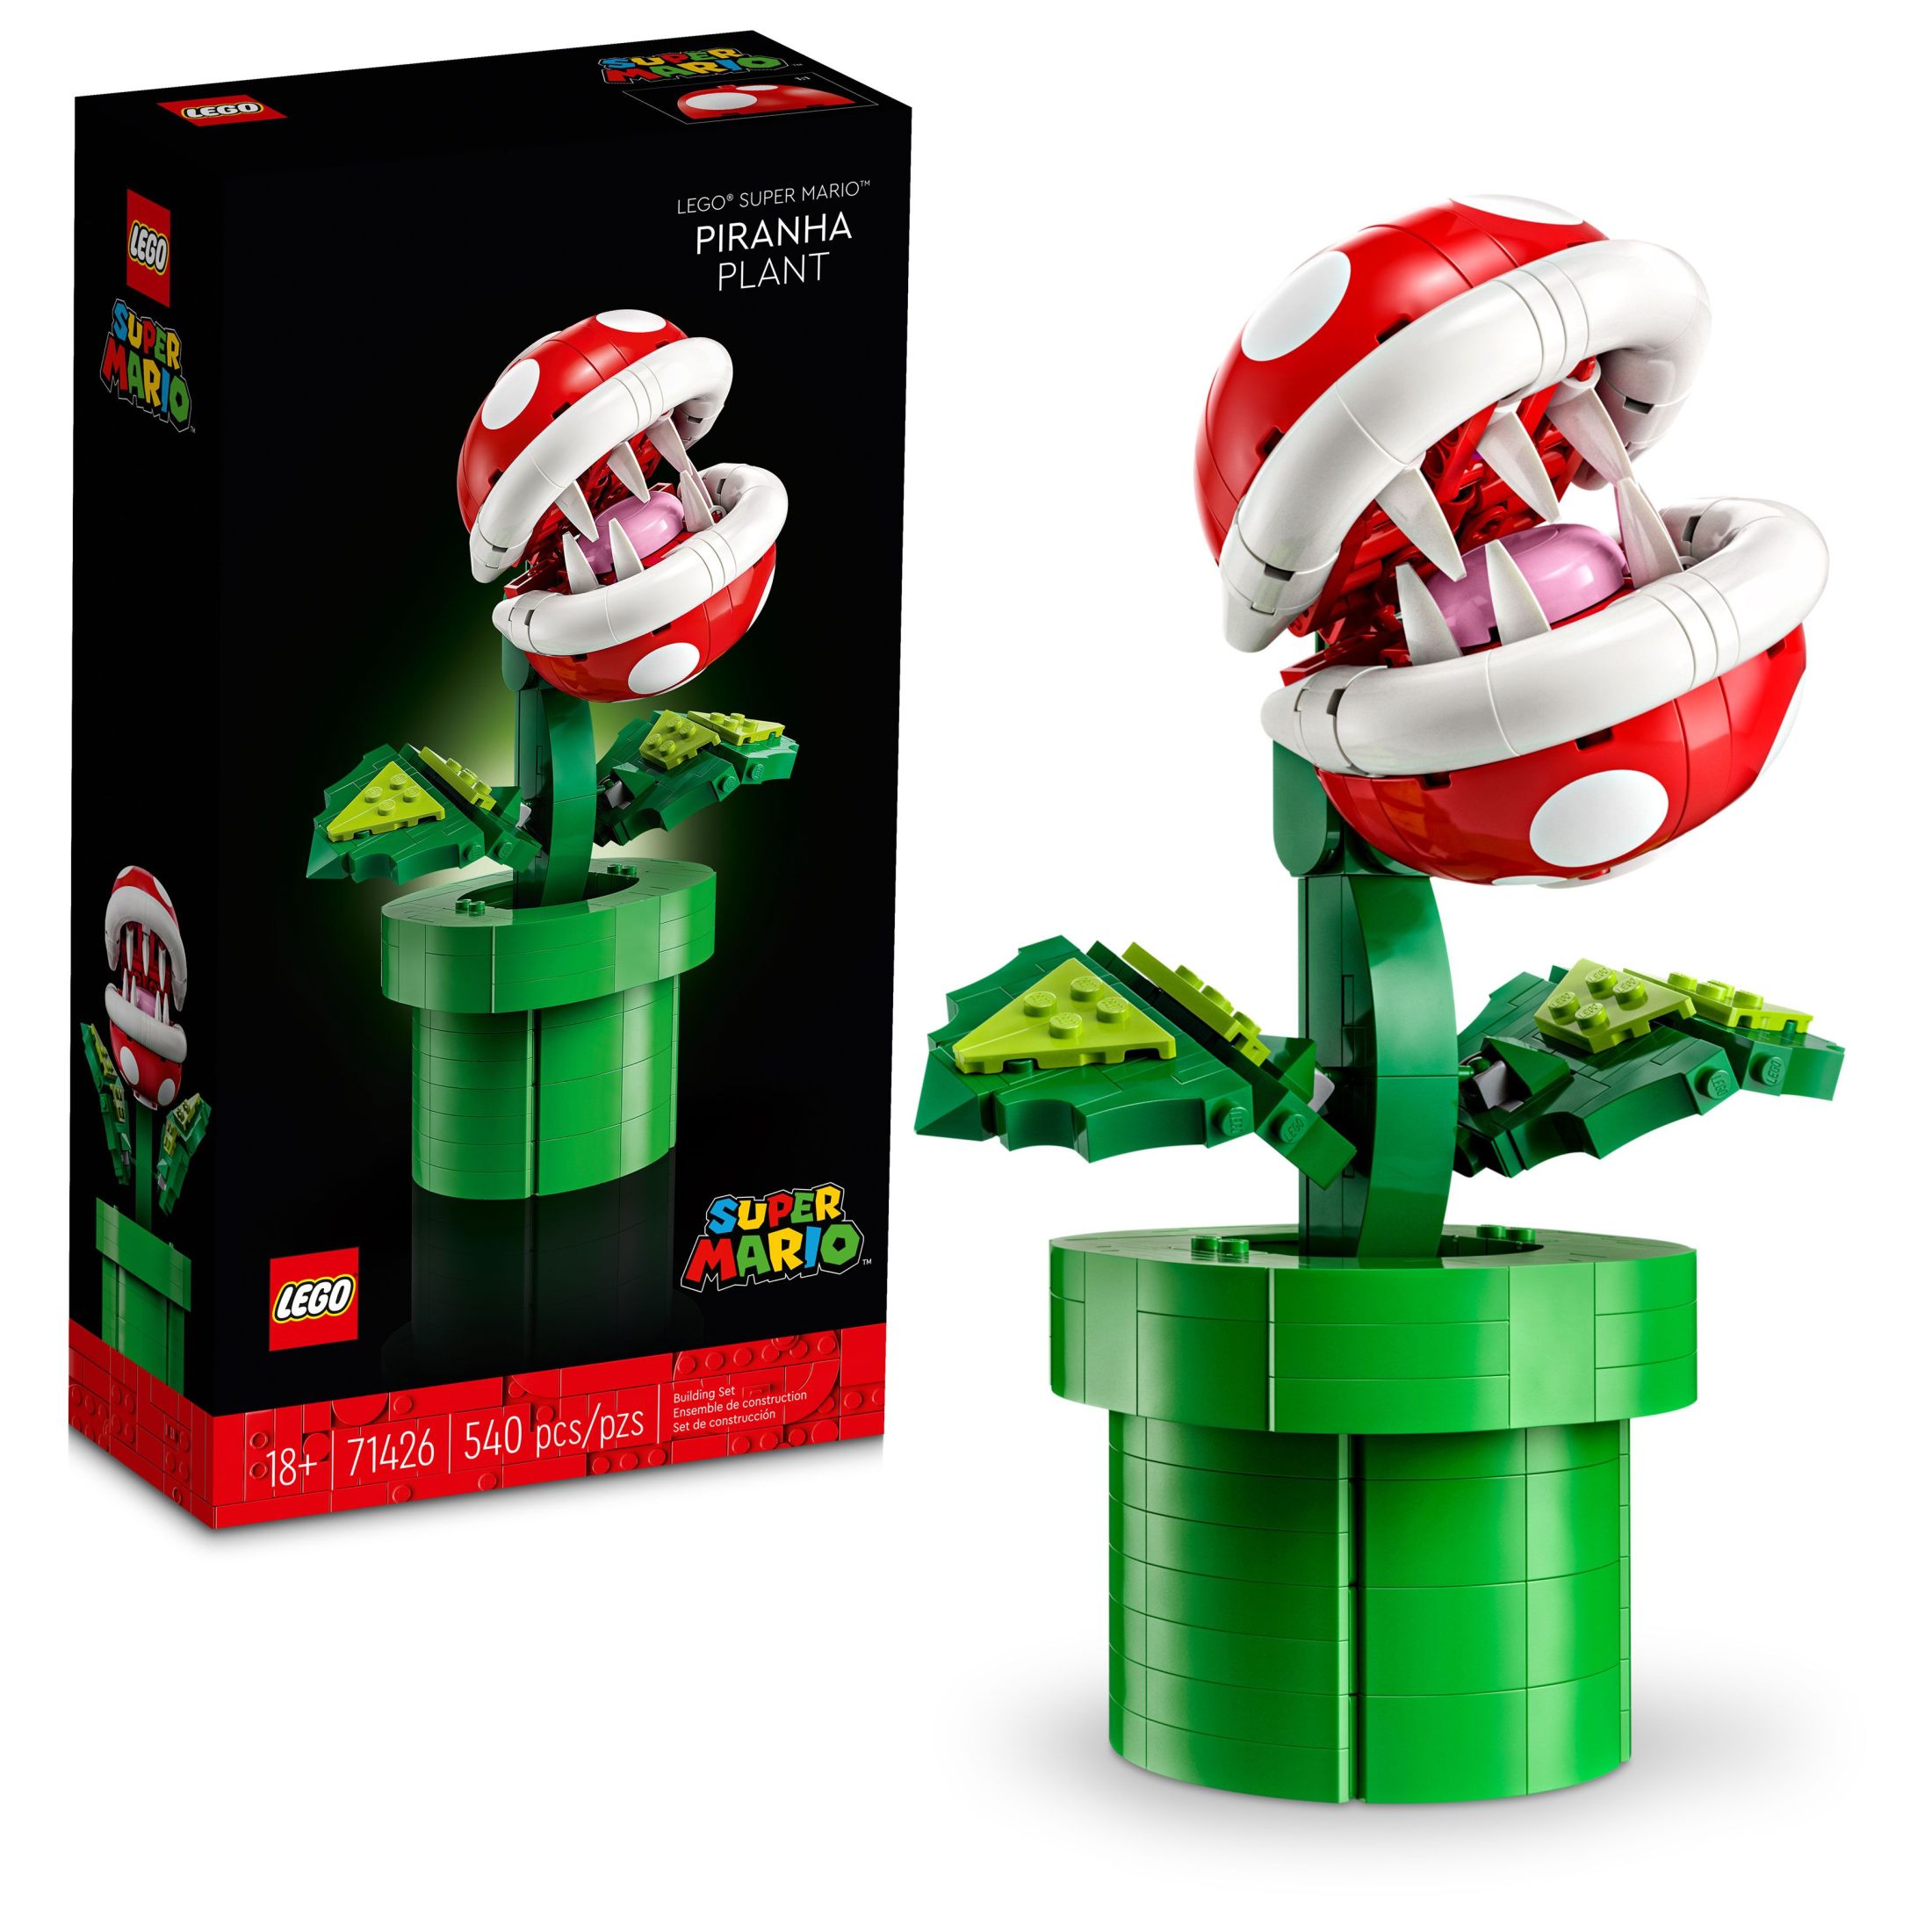 LEGO Super Mario Piranha Plant, Build and Display Super Mario Brothers Collectible for Adults and Teens, Authentically Detailed Posable Figure, Birthday Gift for Gamers and Super Mario Fans, 71426 - image 1 of 7